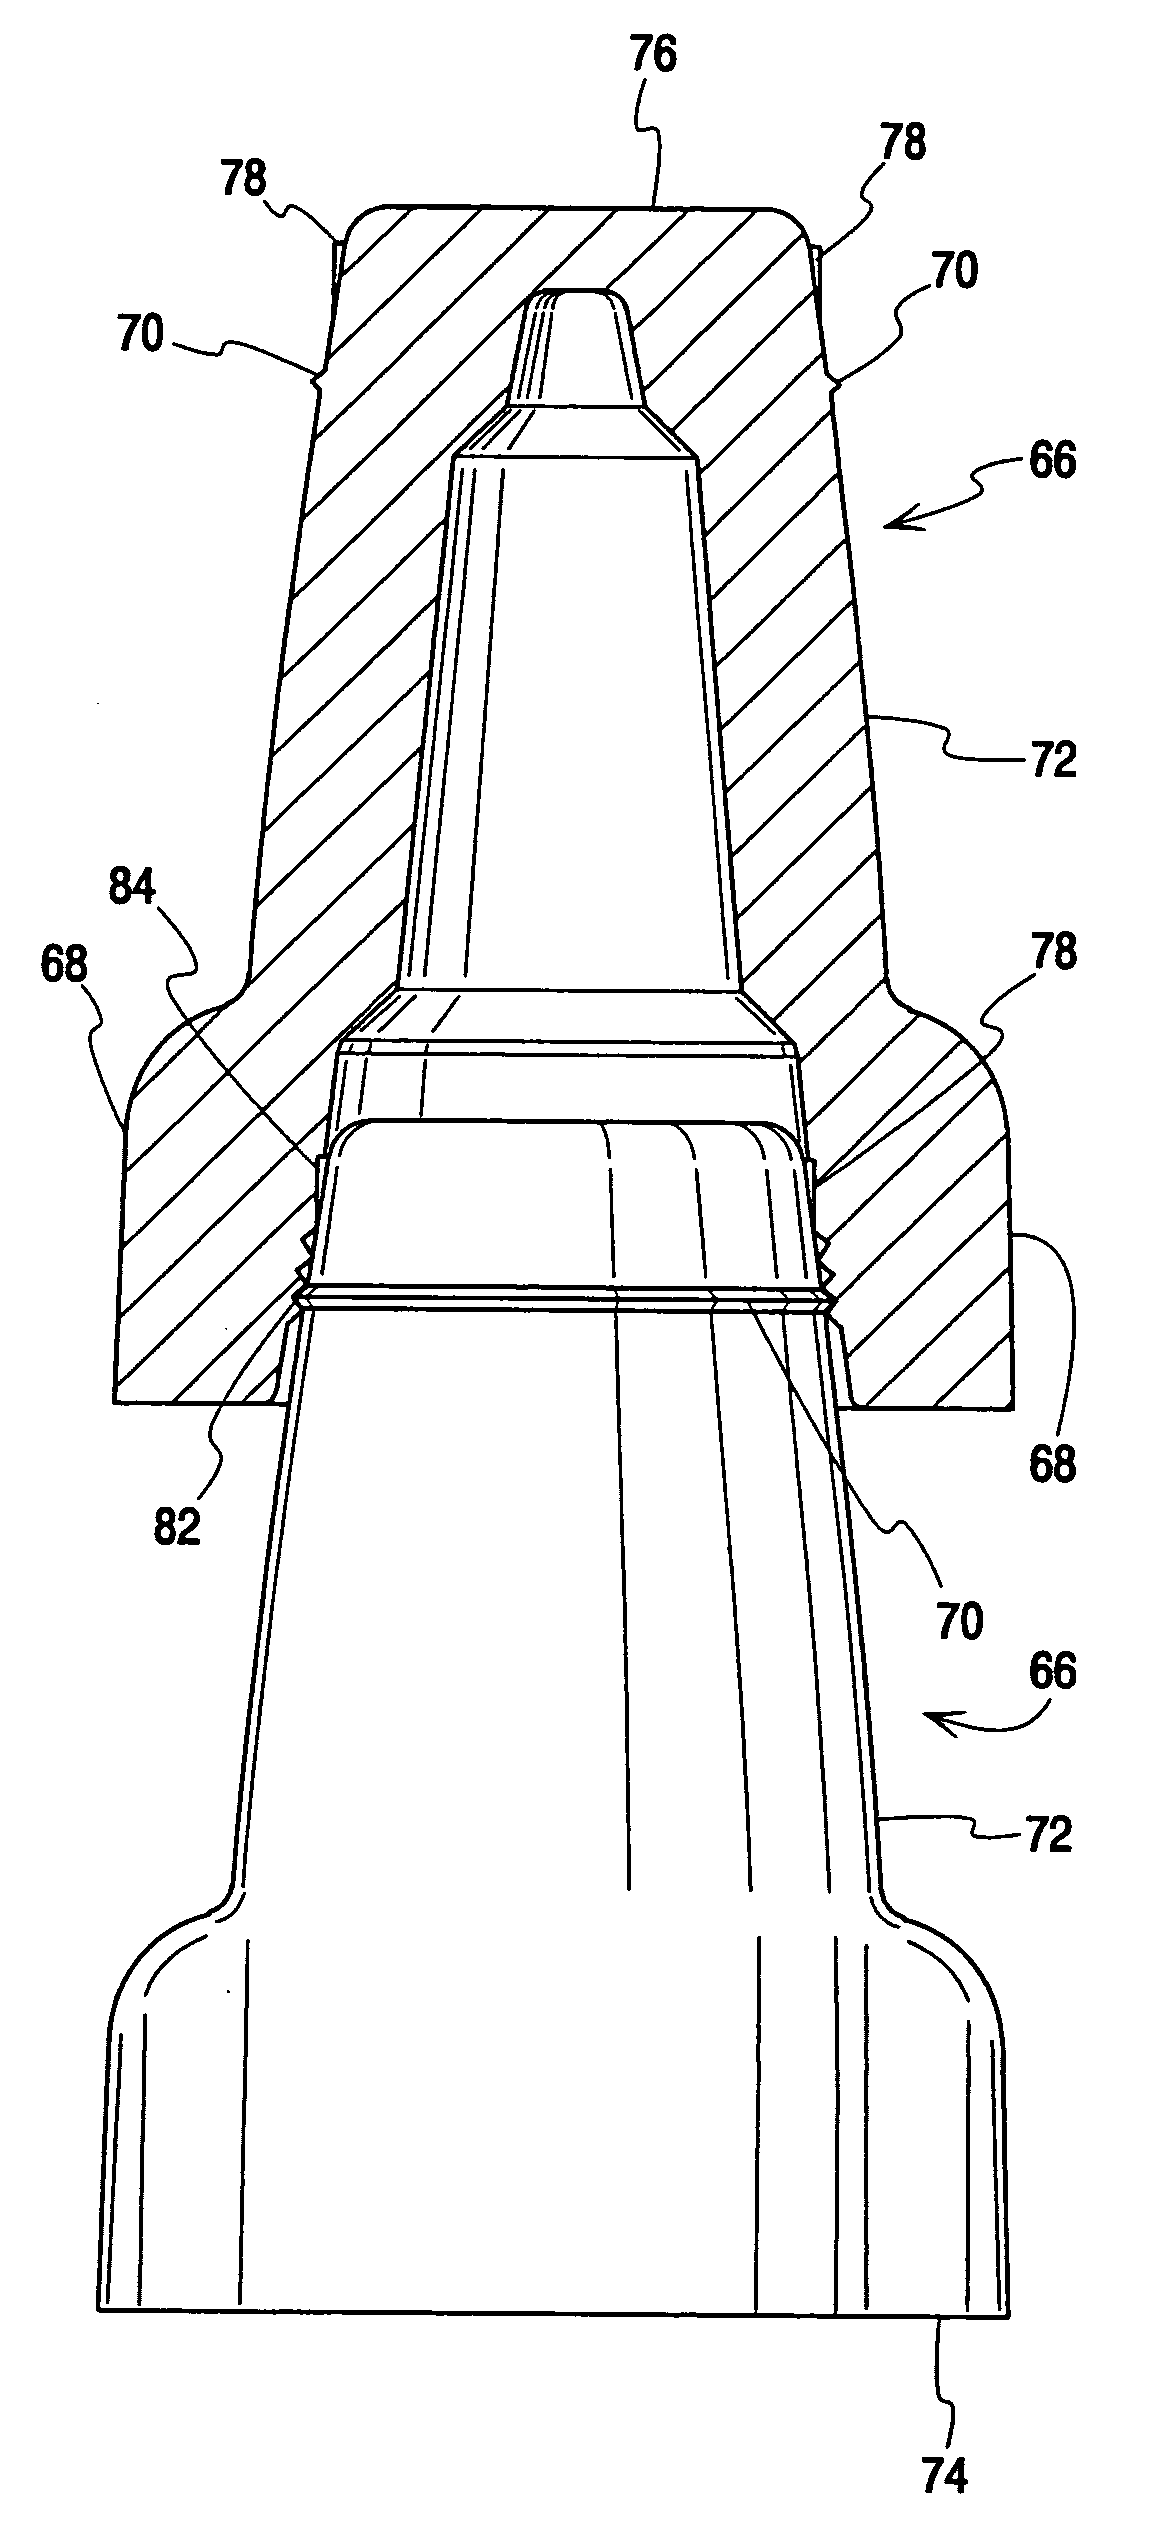 Twist-on wire connector applicator and interlocking wire connectors for use therewith